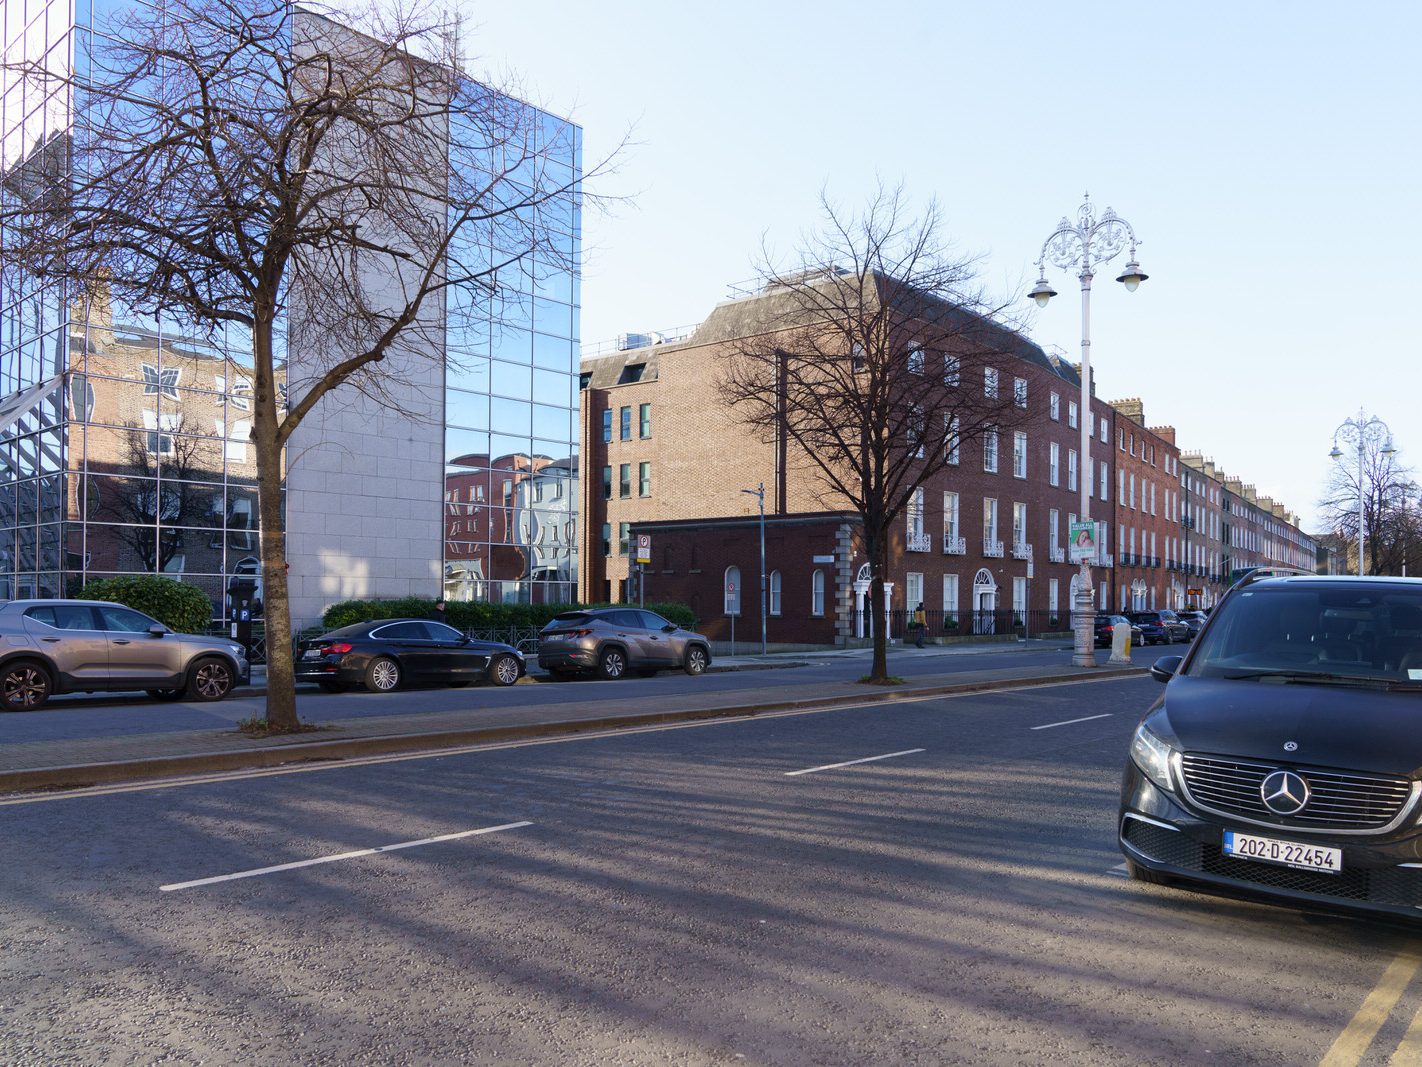 BAGGOT STREET WAS HOME TO SOME INTERESTING PEOPLE [11 FEBRUARY 2024]-228068-1